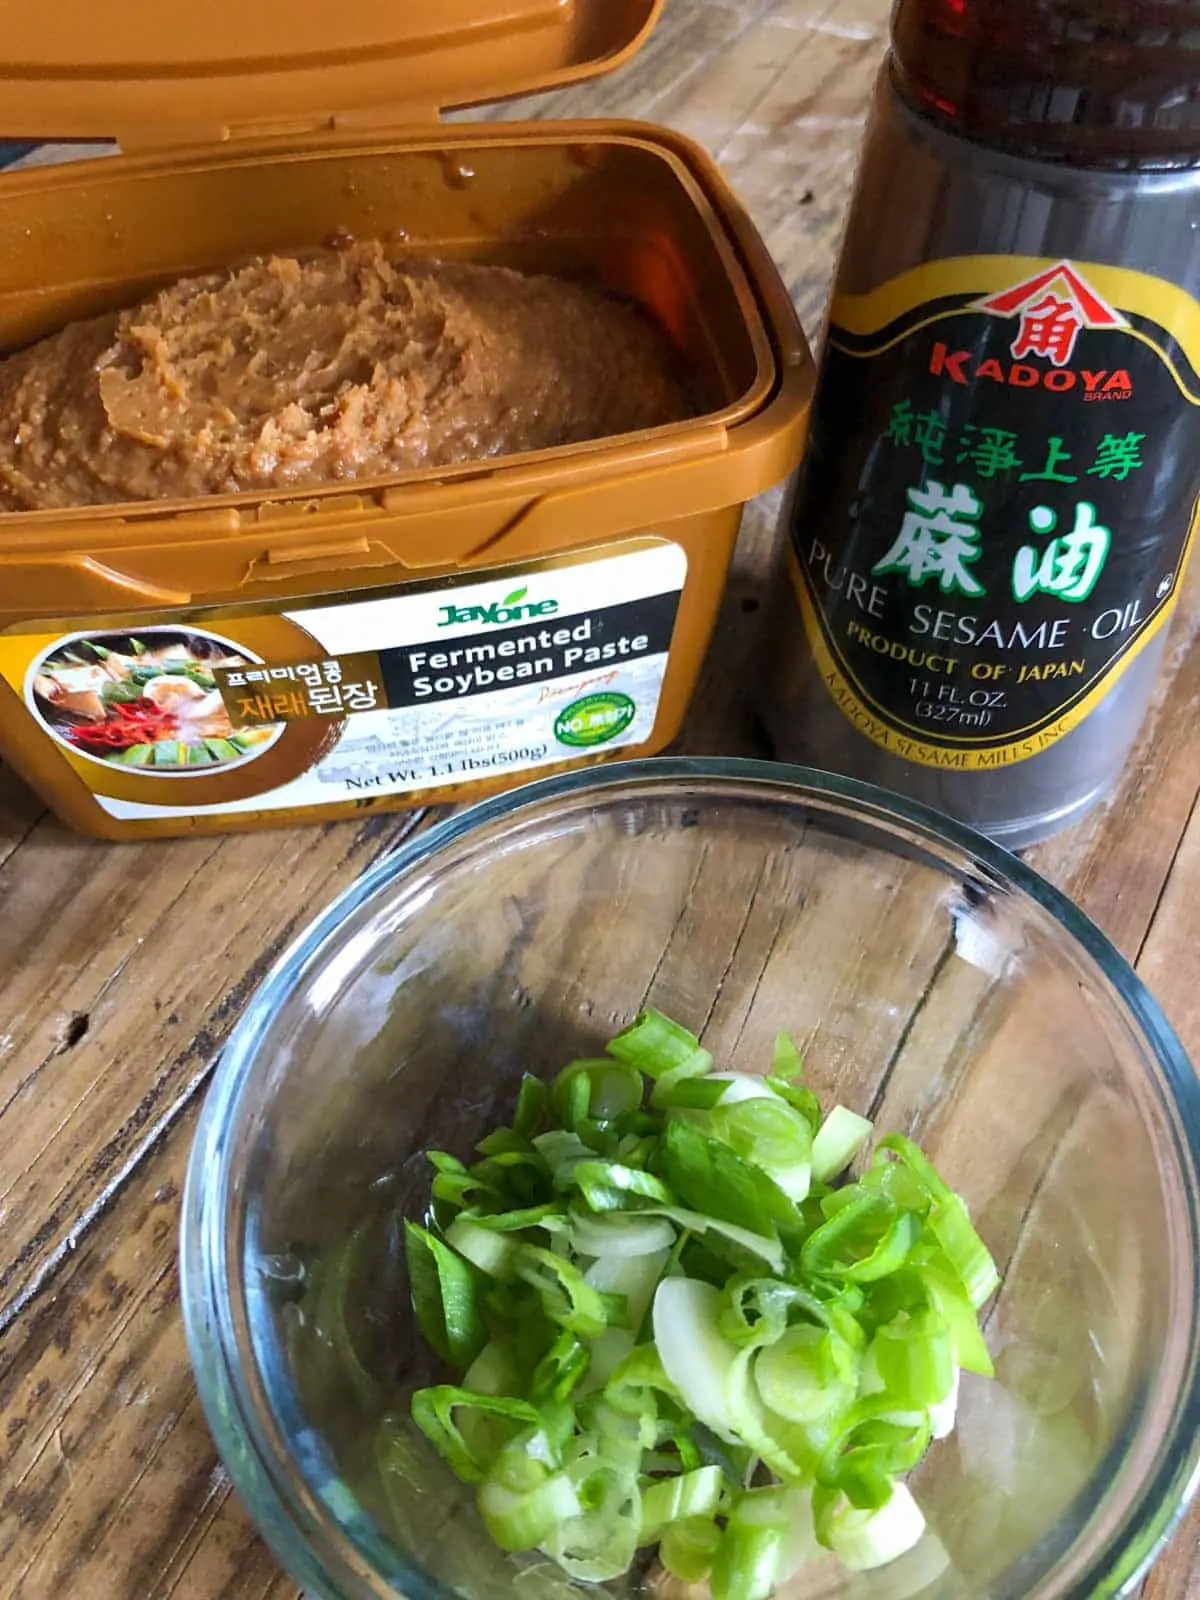 A container of fermented soybean paste, a bottle of sesame oil, and a glass bowl with sliced green onions.